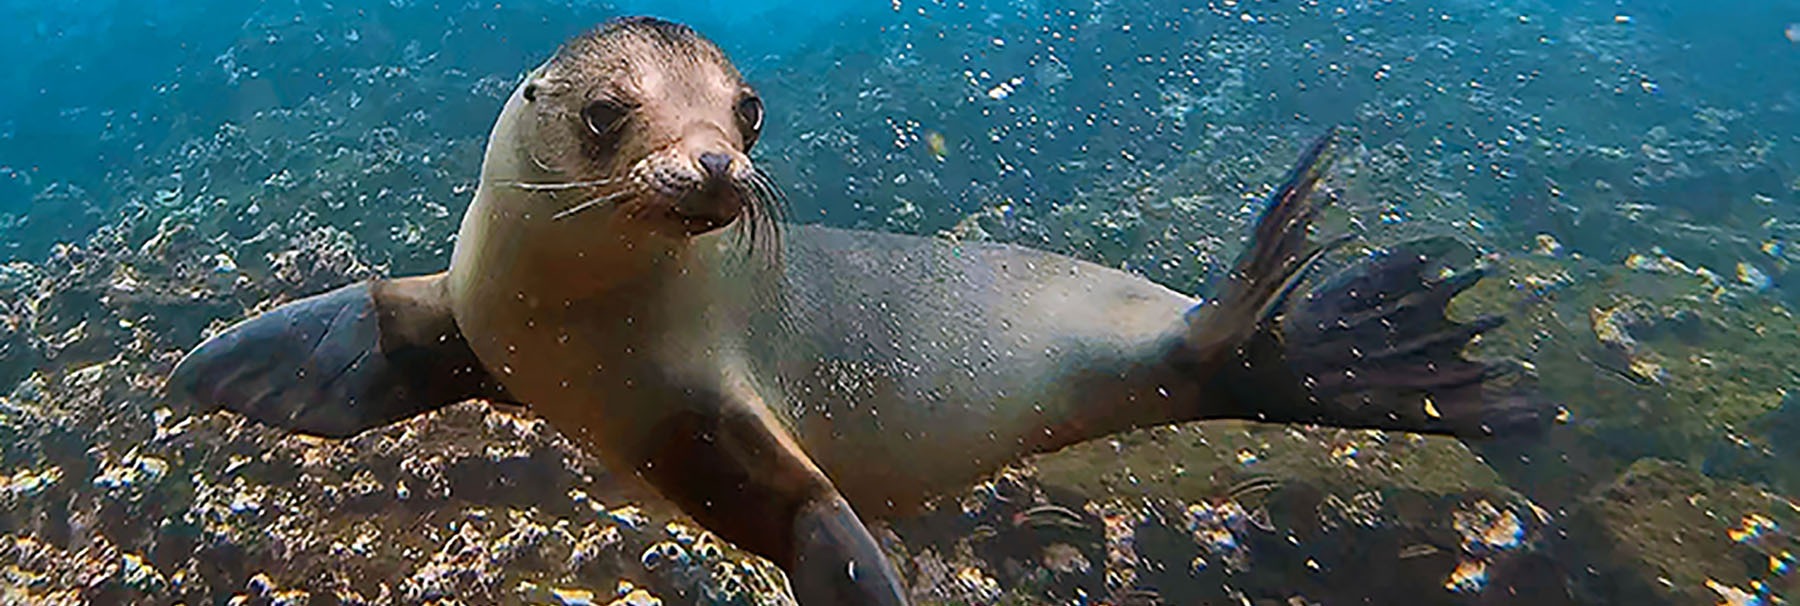 Sea lion underwater, marine biology, Forestry and Natural Resources.